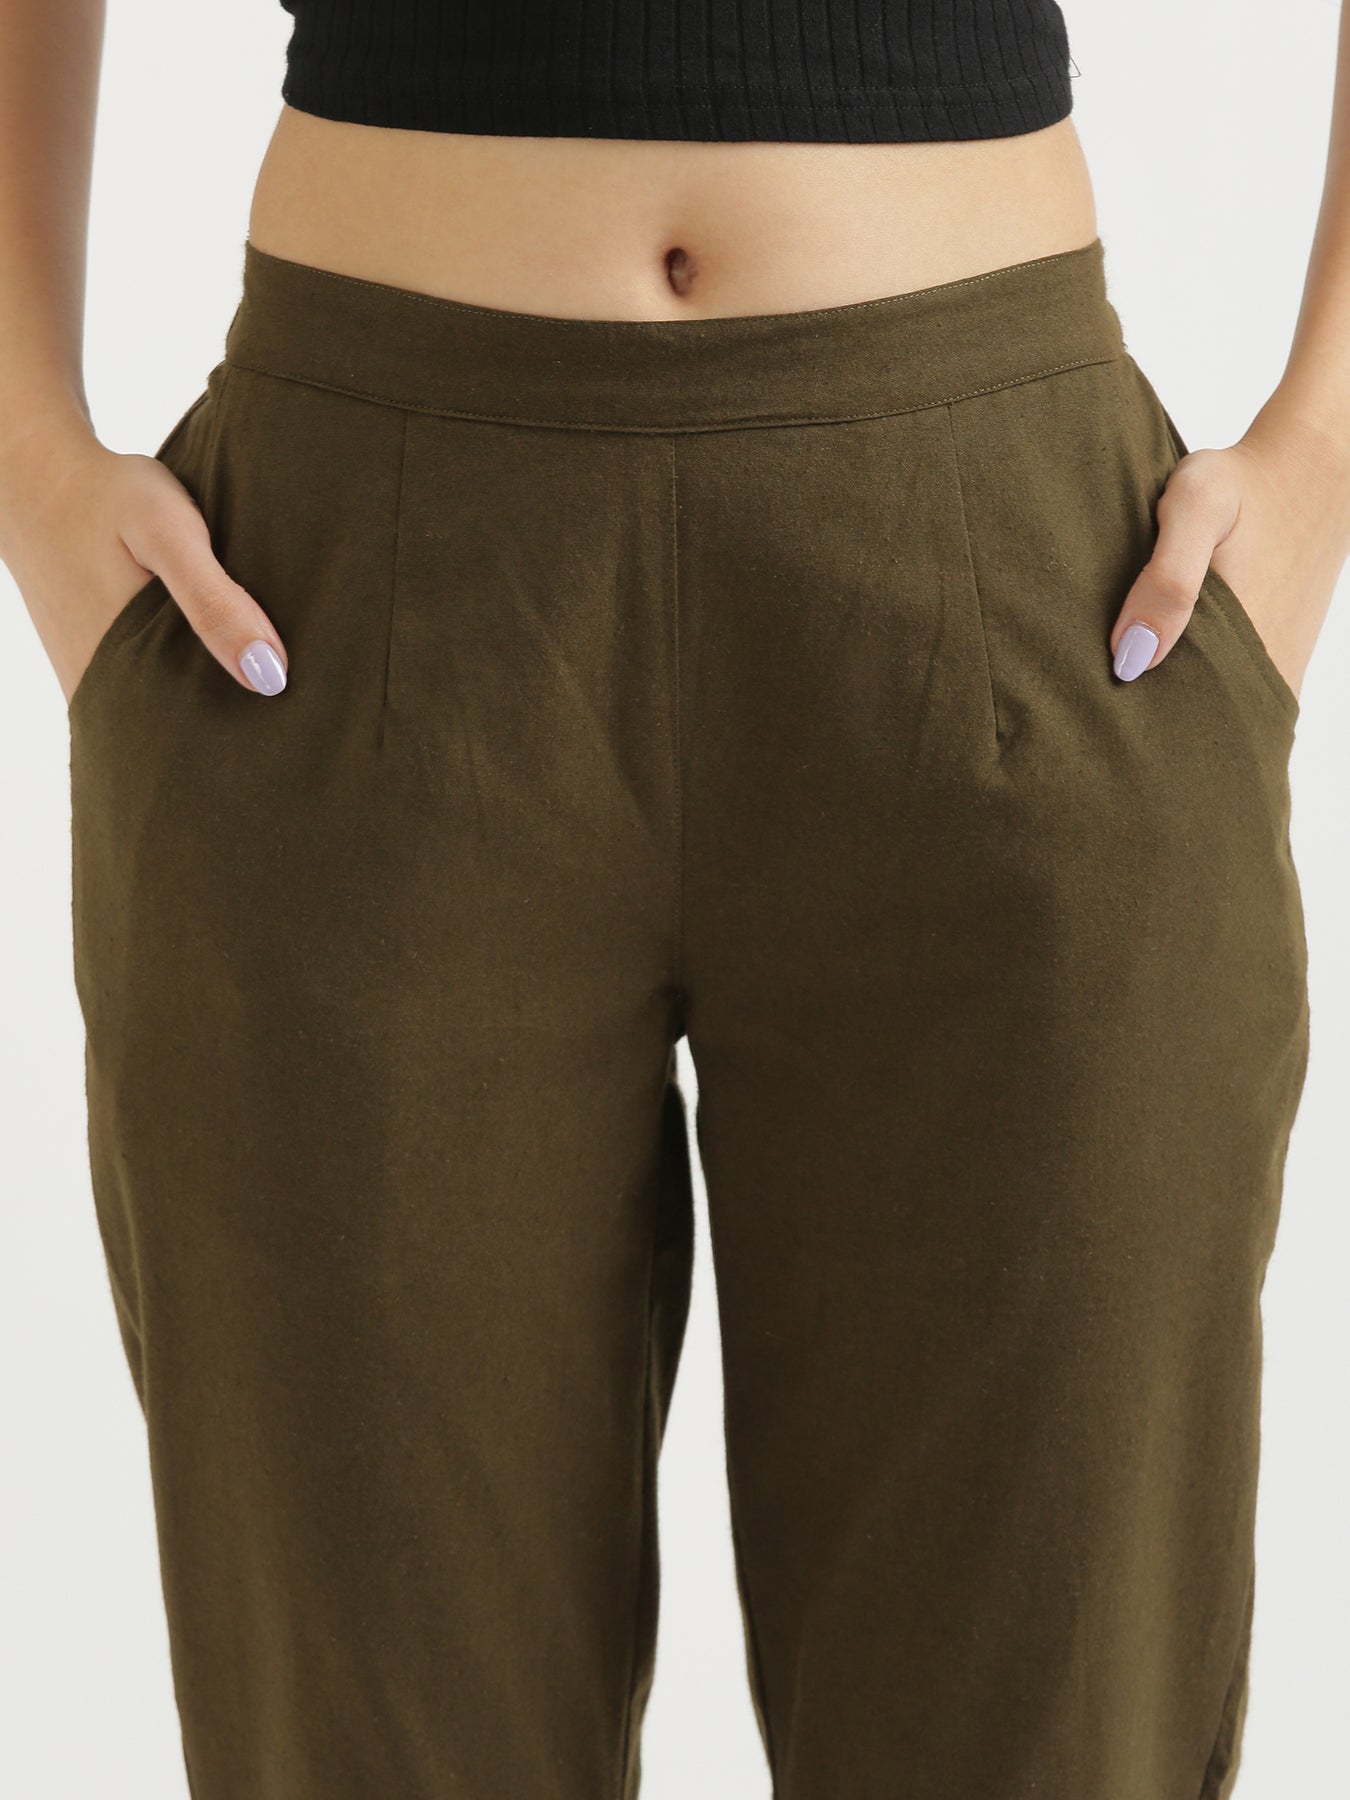 What is the perfect combination of green pant? - Quora